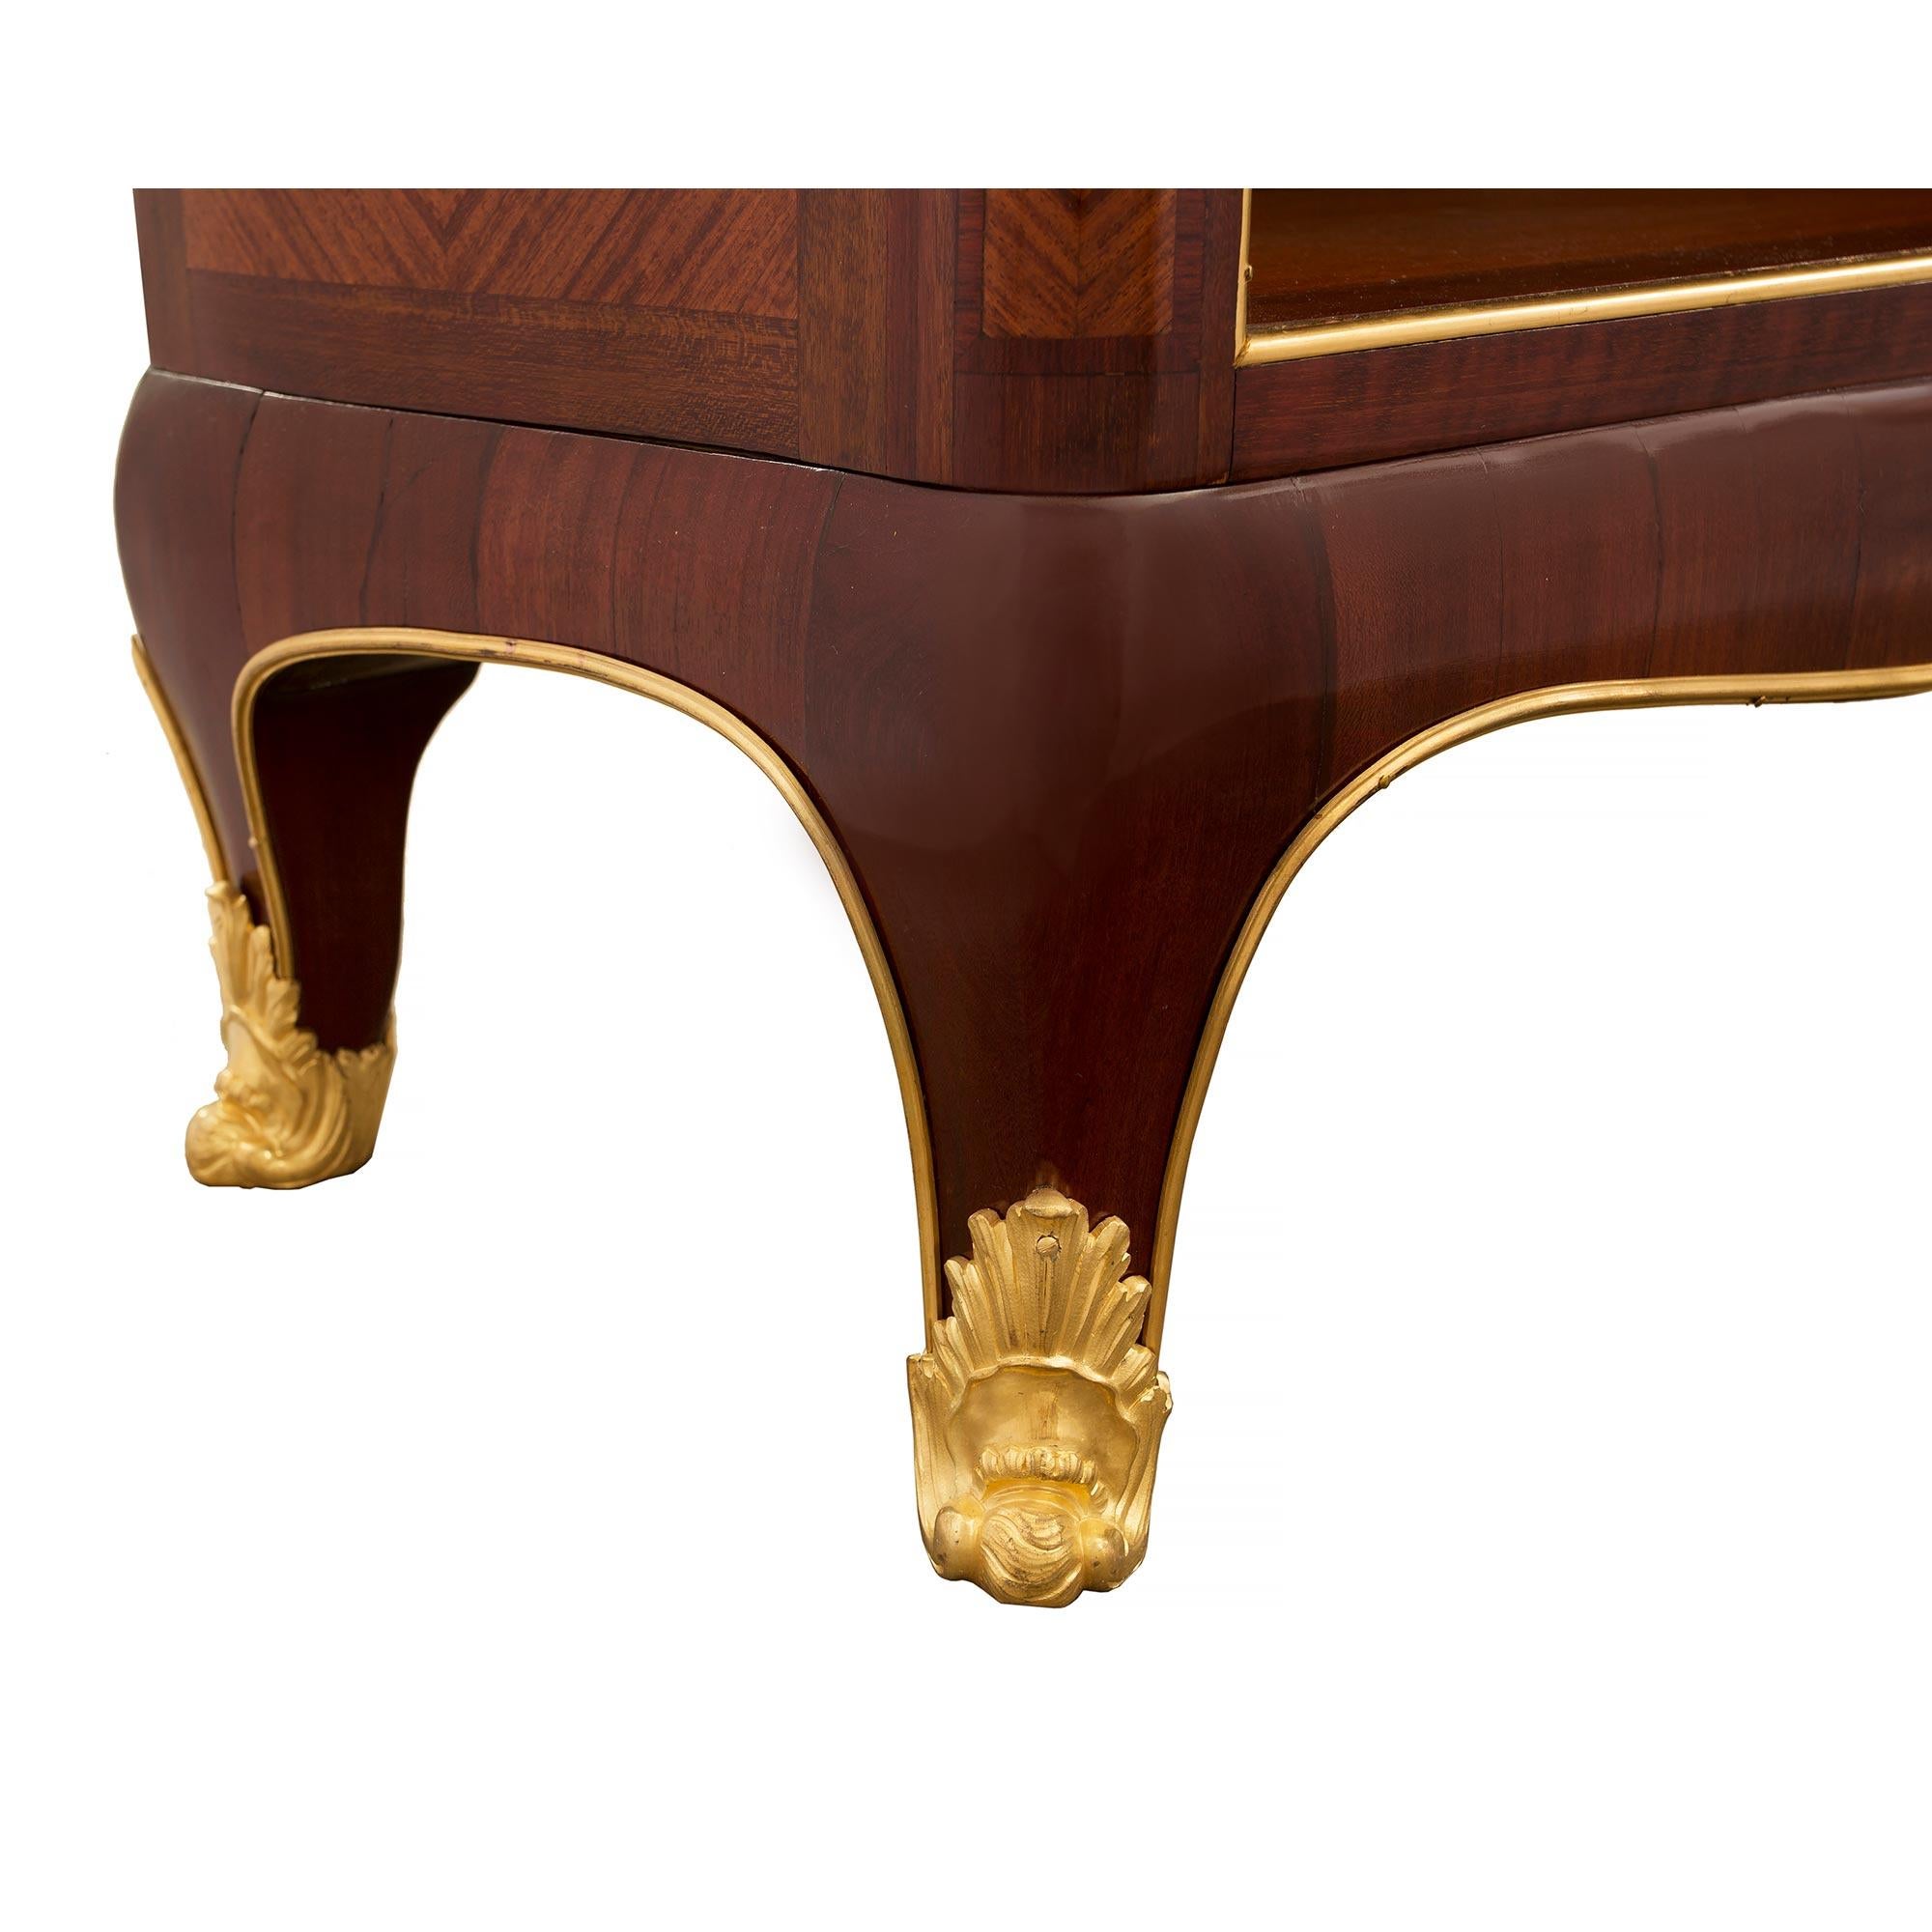 French 19th Century Louis XV Style Tulipwood and Ormolu Bibus For Sale 2